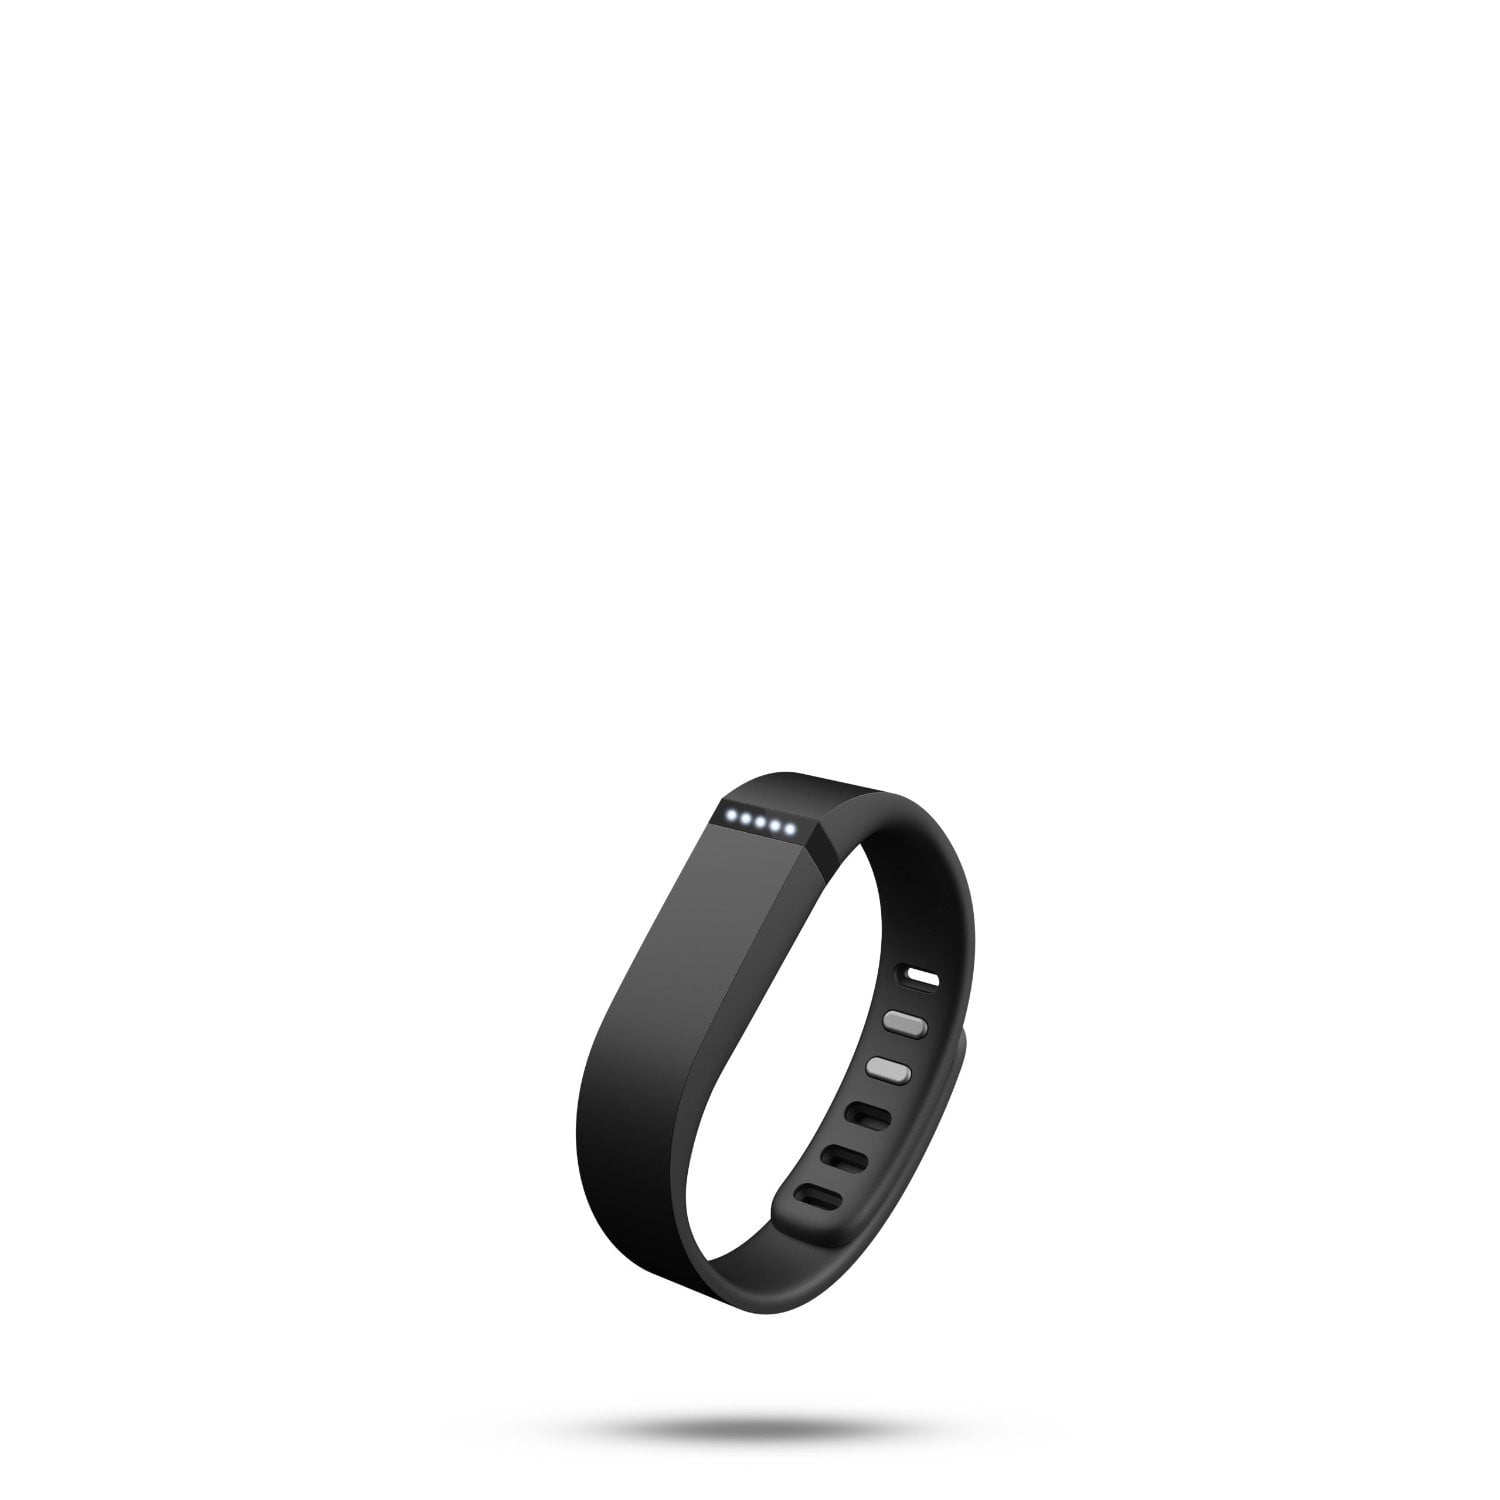 NEW Fitbit Flex Wireless Activity Wristband and Sleep Tracker Black Small+Large 